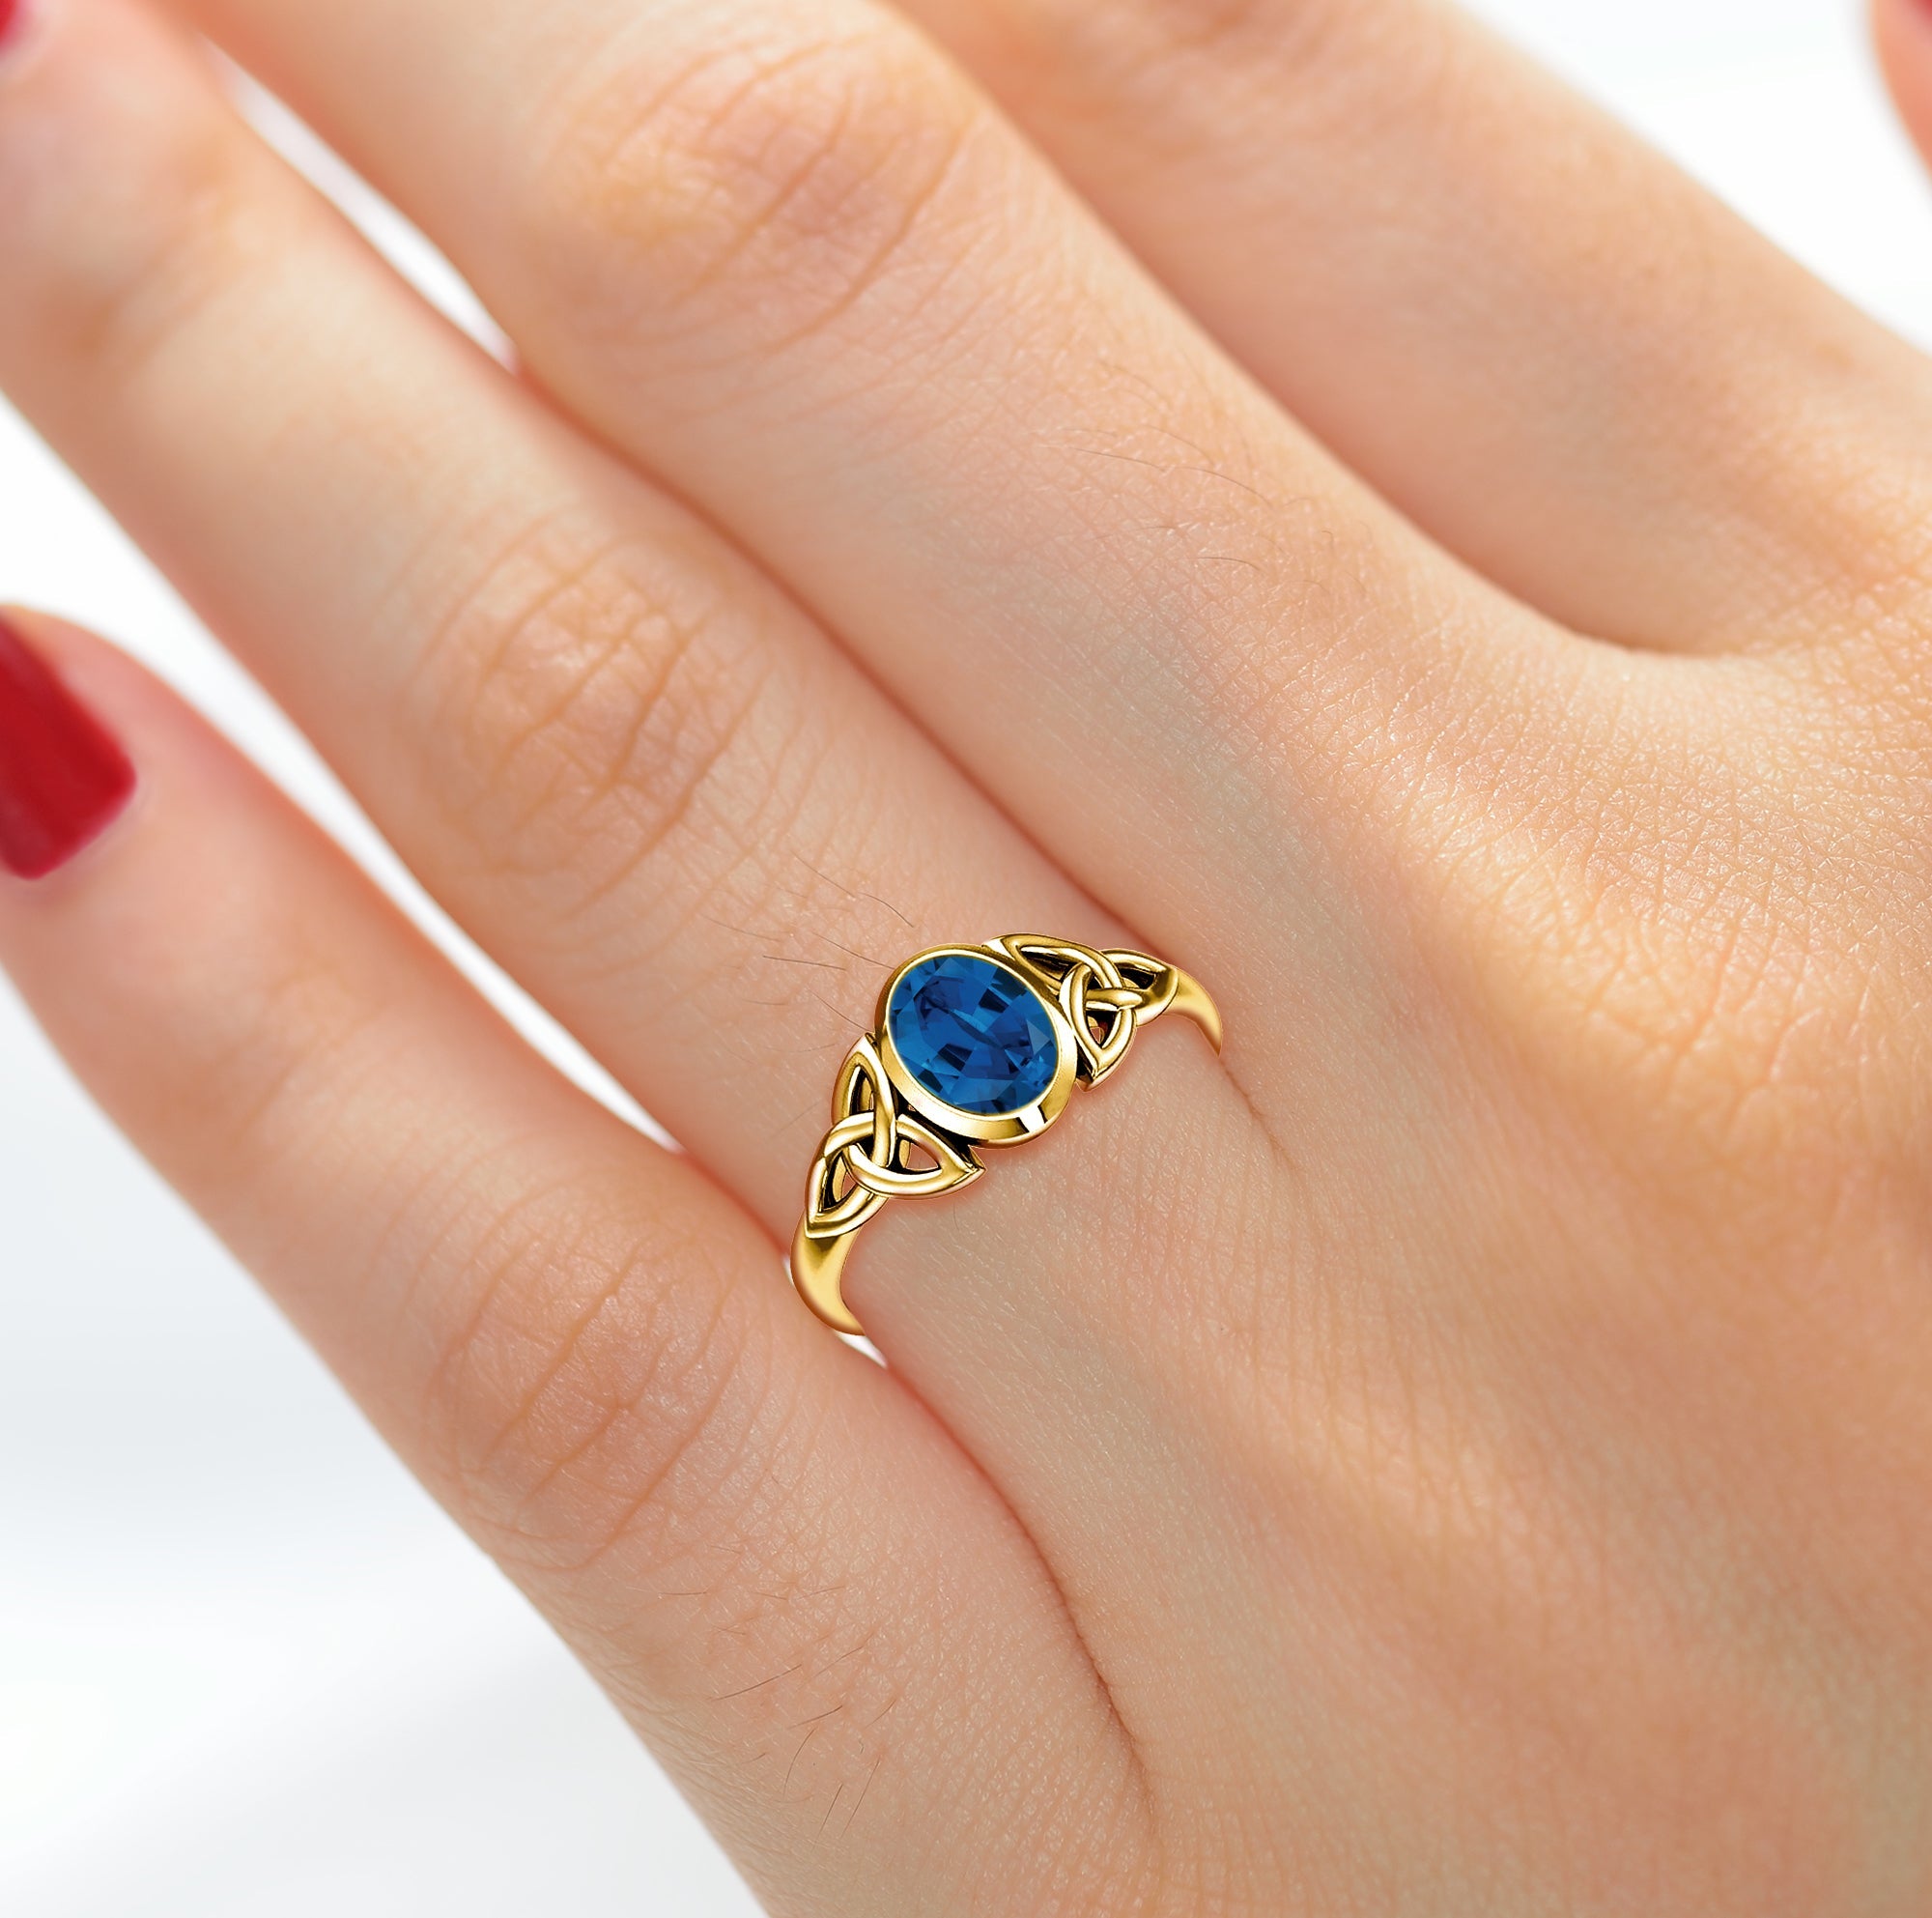 Natural Blue Sapphire Designer Ring For Women 925 Sterling Silver September  Birthstone Engagement Ring Handmade Precious Jewelry For Gift (RG-1363) (5  US) | Amazon.com